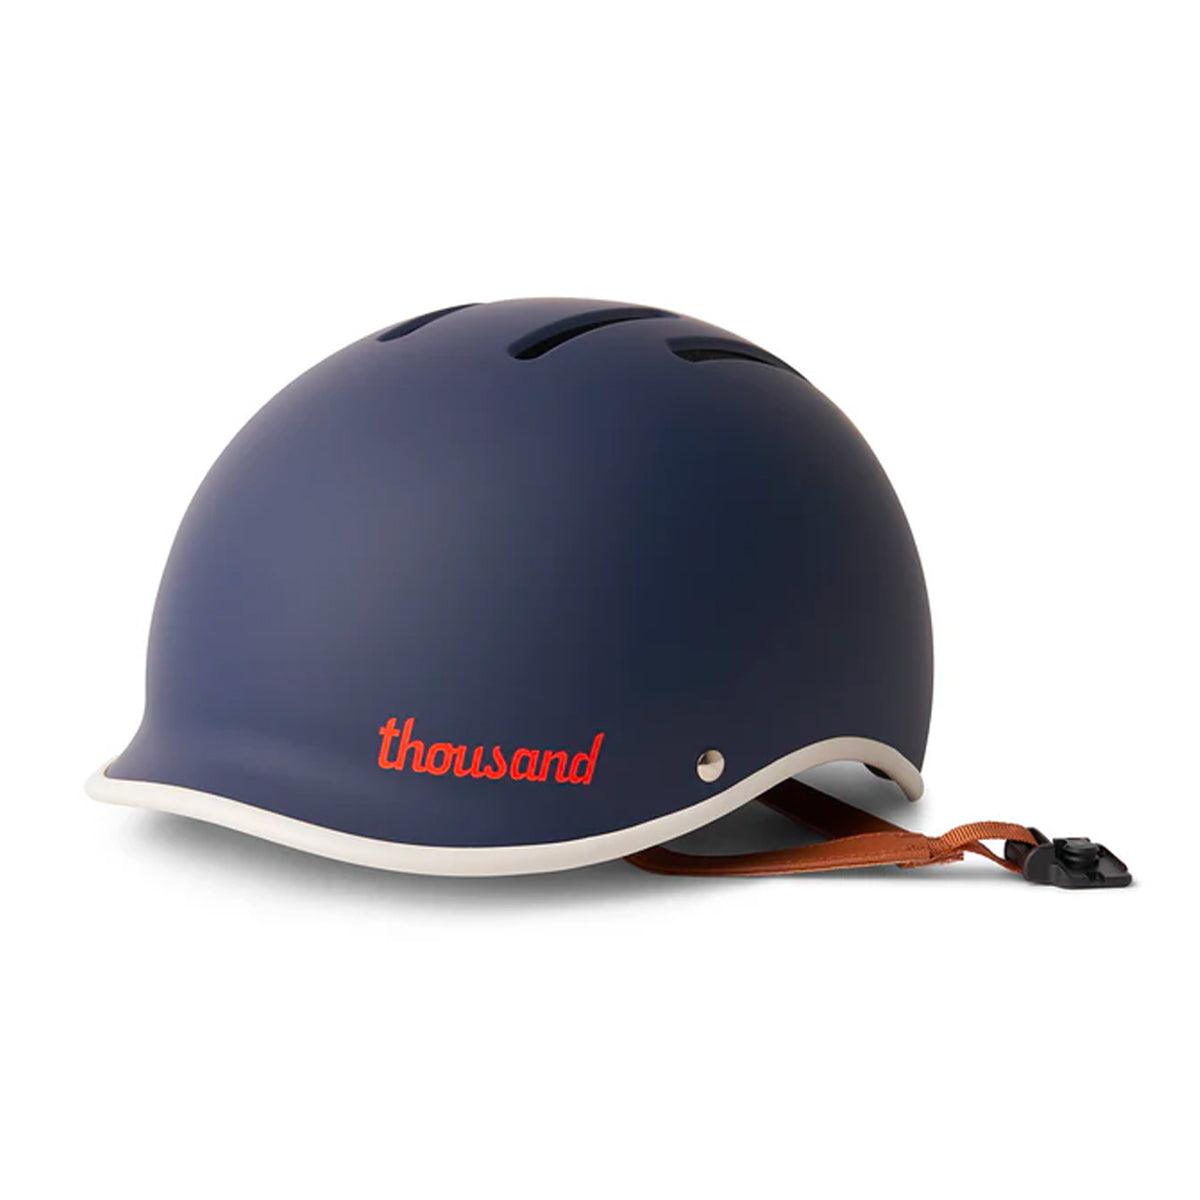 Casque Thousand Heritage 2.0 Collection Bleu Navy - Weebot